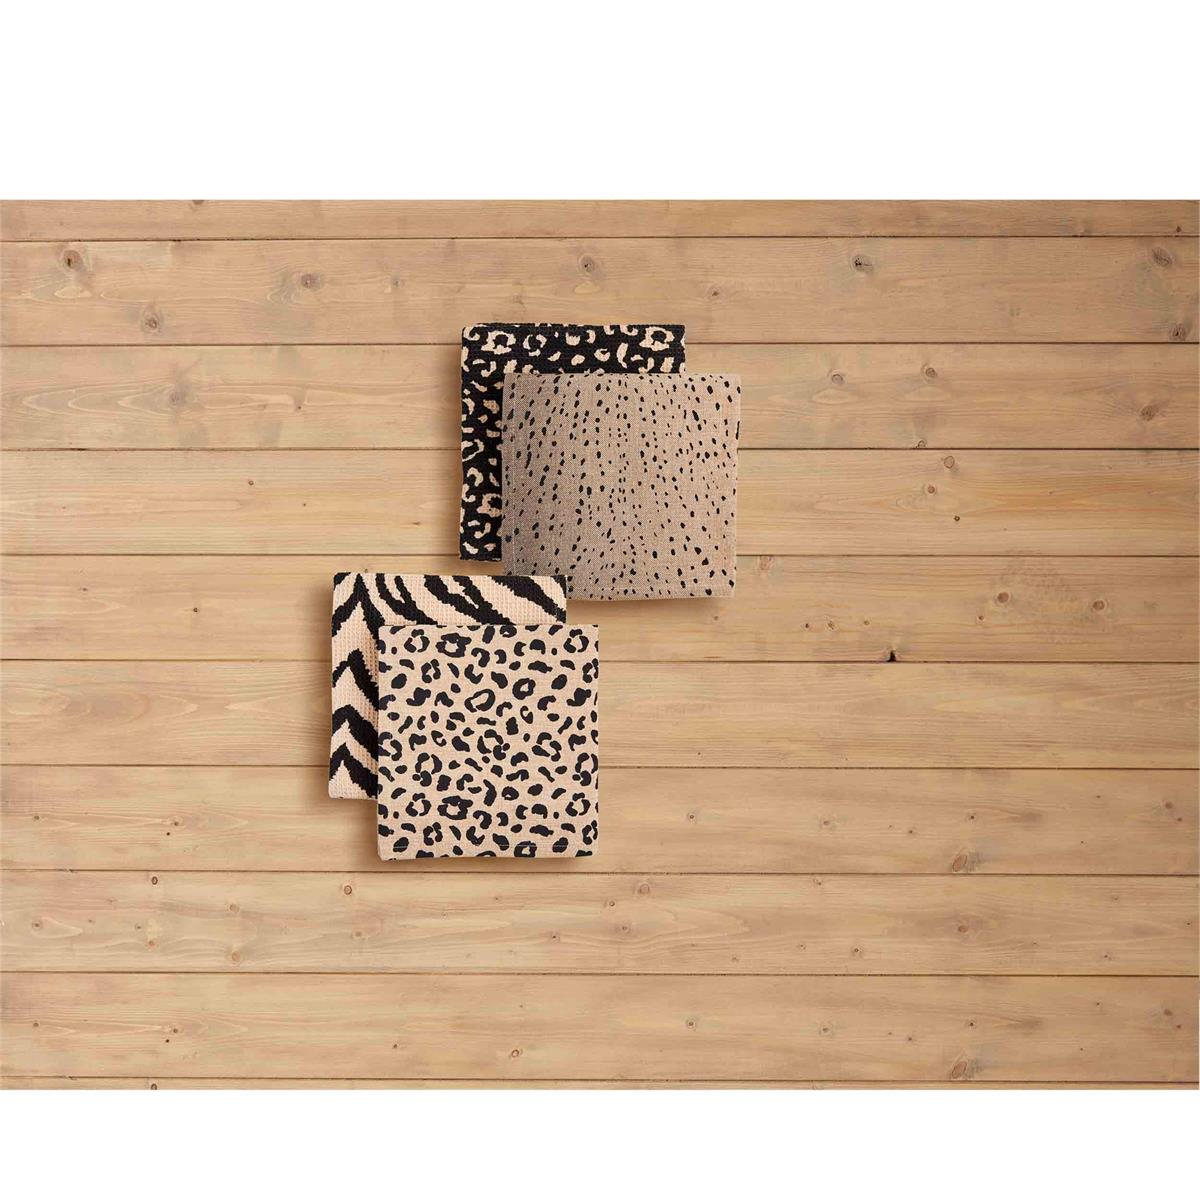 both styles of animal print towels displayed on a light stained shiplap background